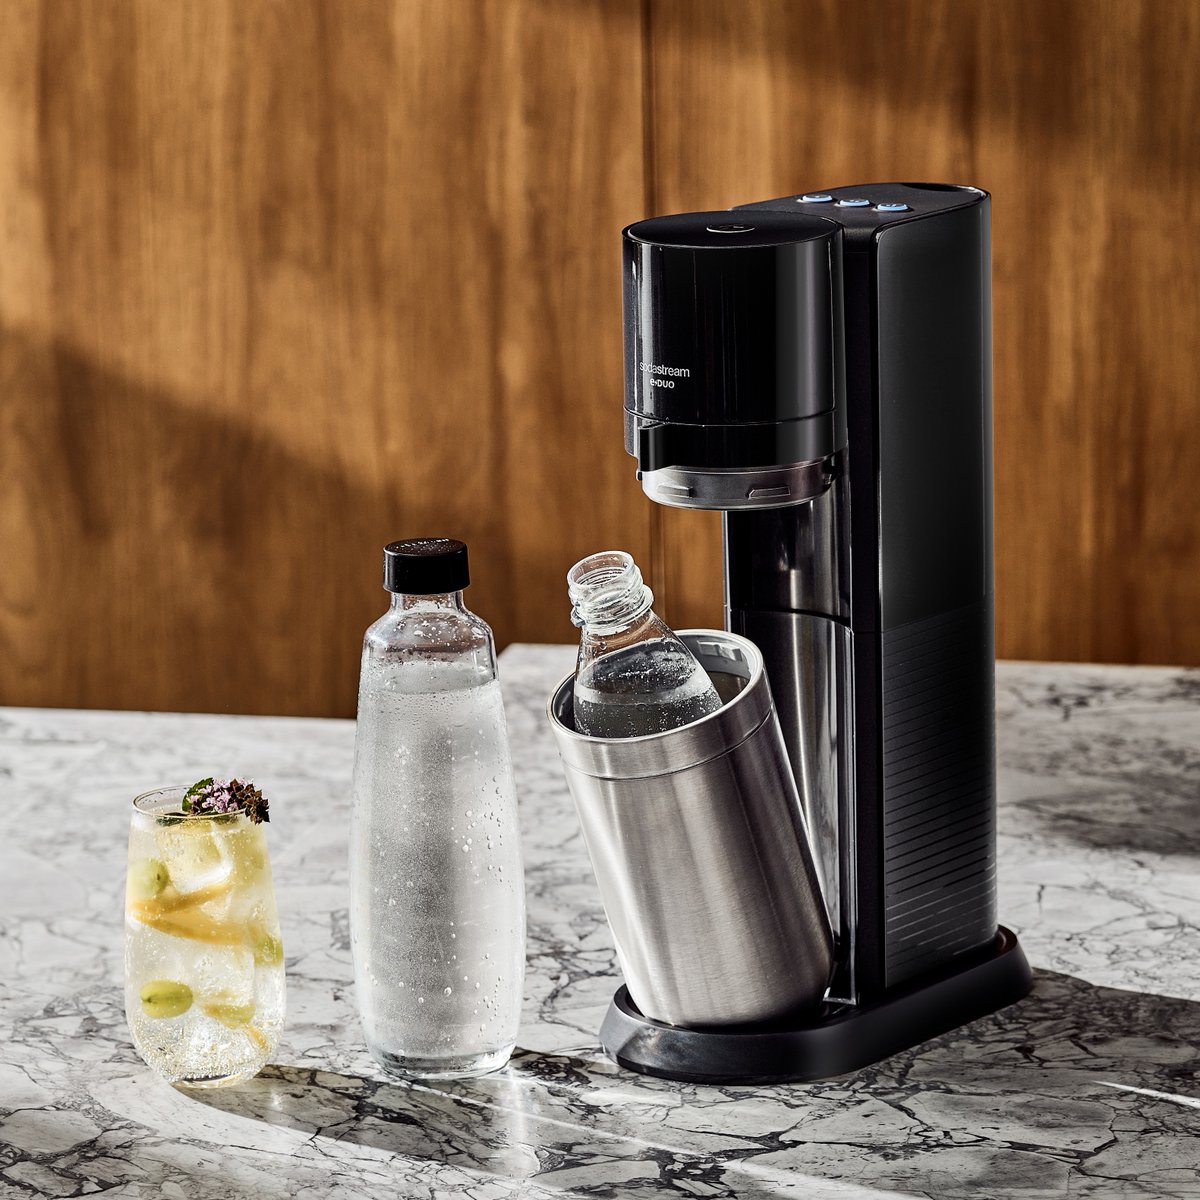 Do you use glass bottles at home and plastic on-the-go? The E-Duo is perfect for you! Switch quickly and easily between bottle types with three fizz presets at the push of a button for unparalleled convenience. 🤗 #SodaStream #SparklingWater